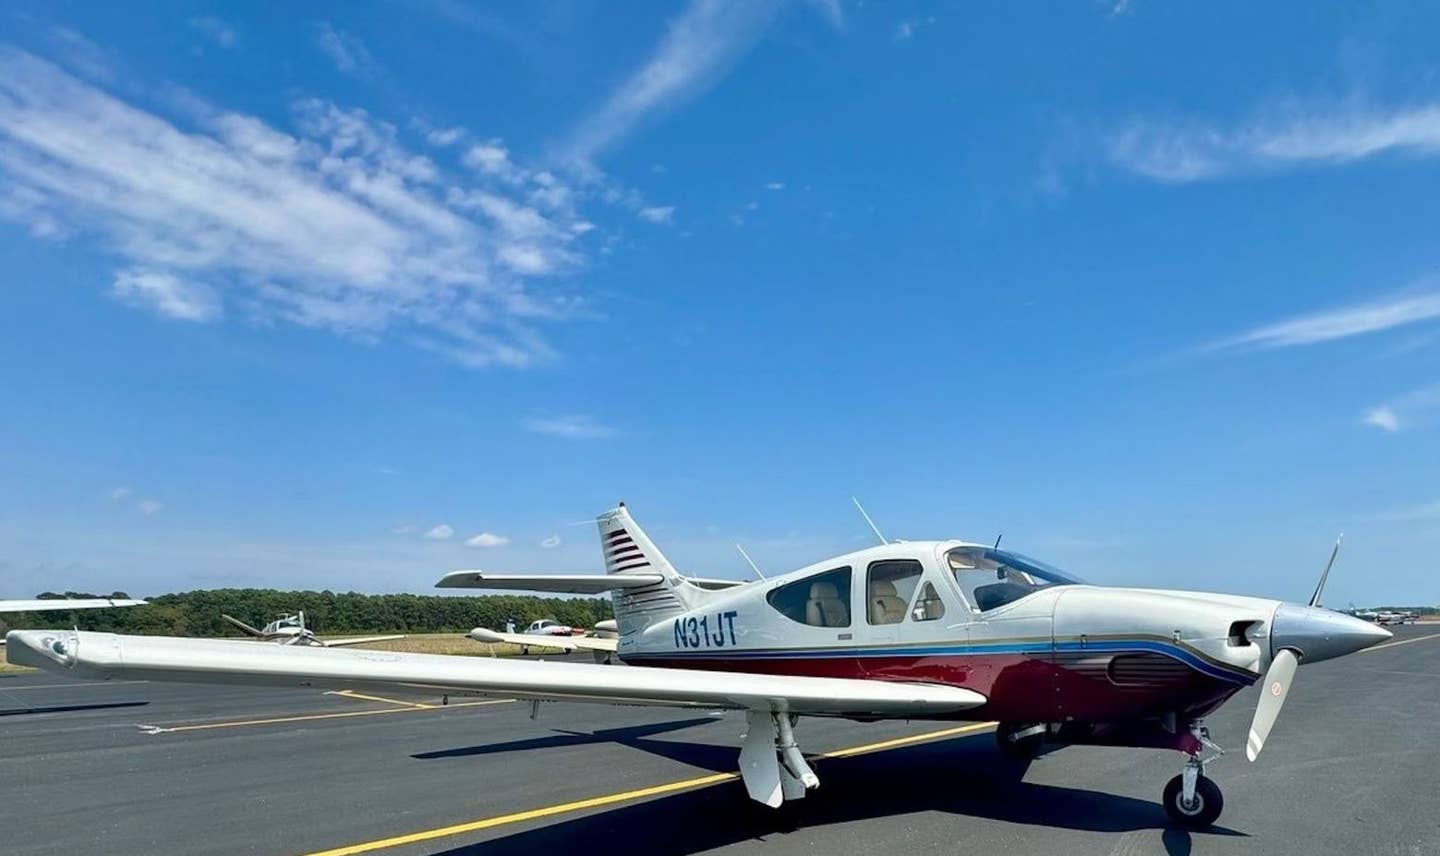 This 1978 Rockwell Commander Is a Conversation-Starting ‘AircraftForSale’ Top Pick